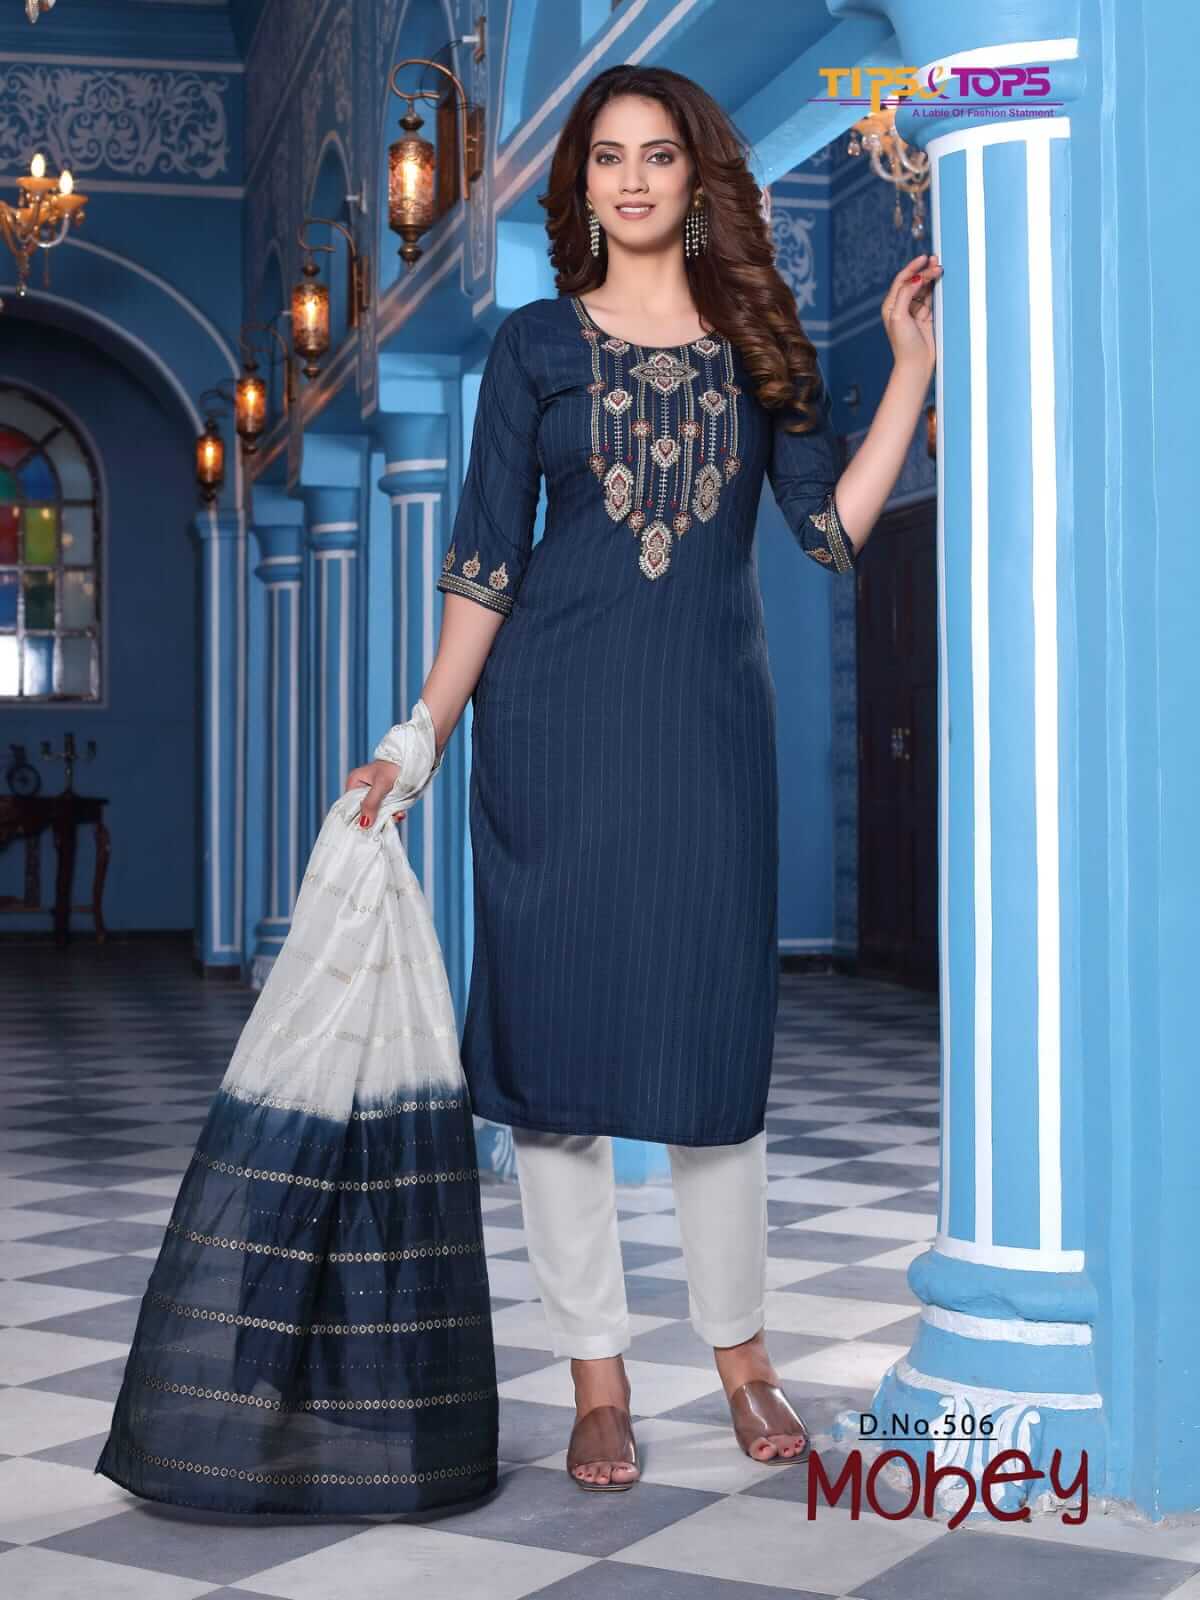 Tips and Tops Mohey vol 5 Embroidery Salwar Kameez Catalog collection 6